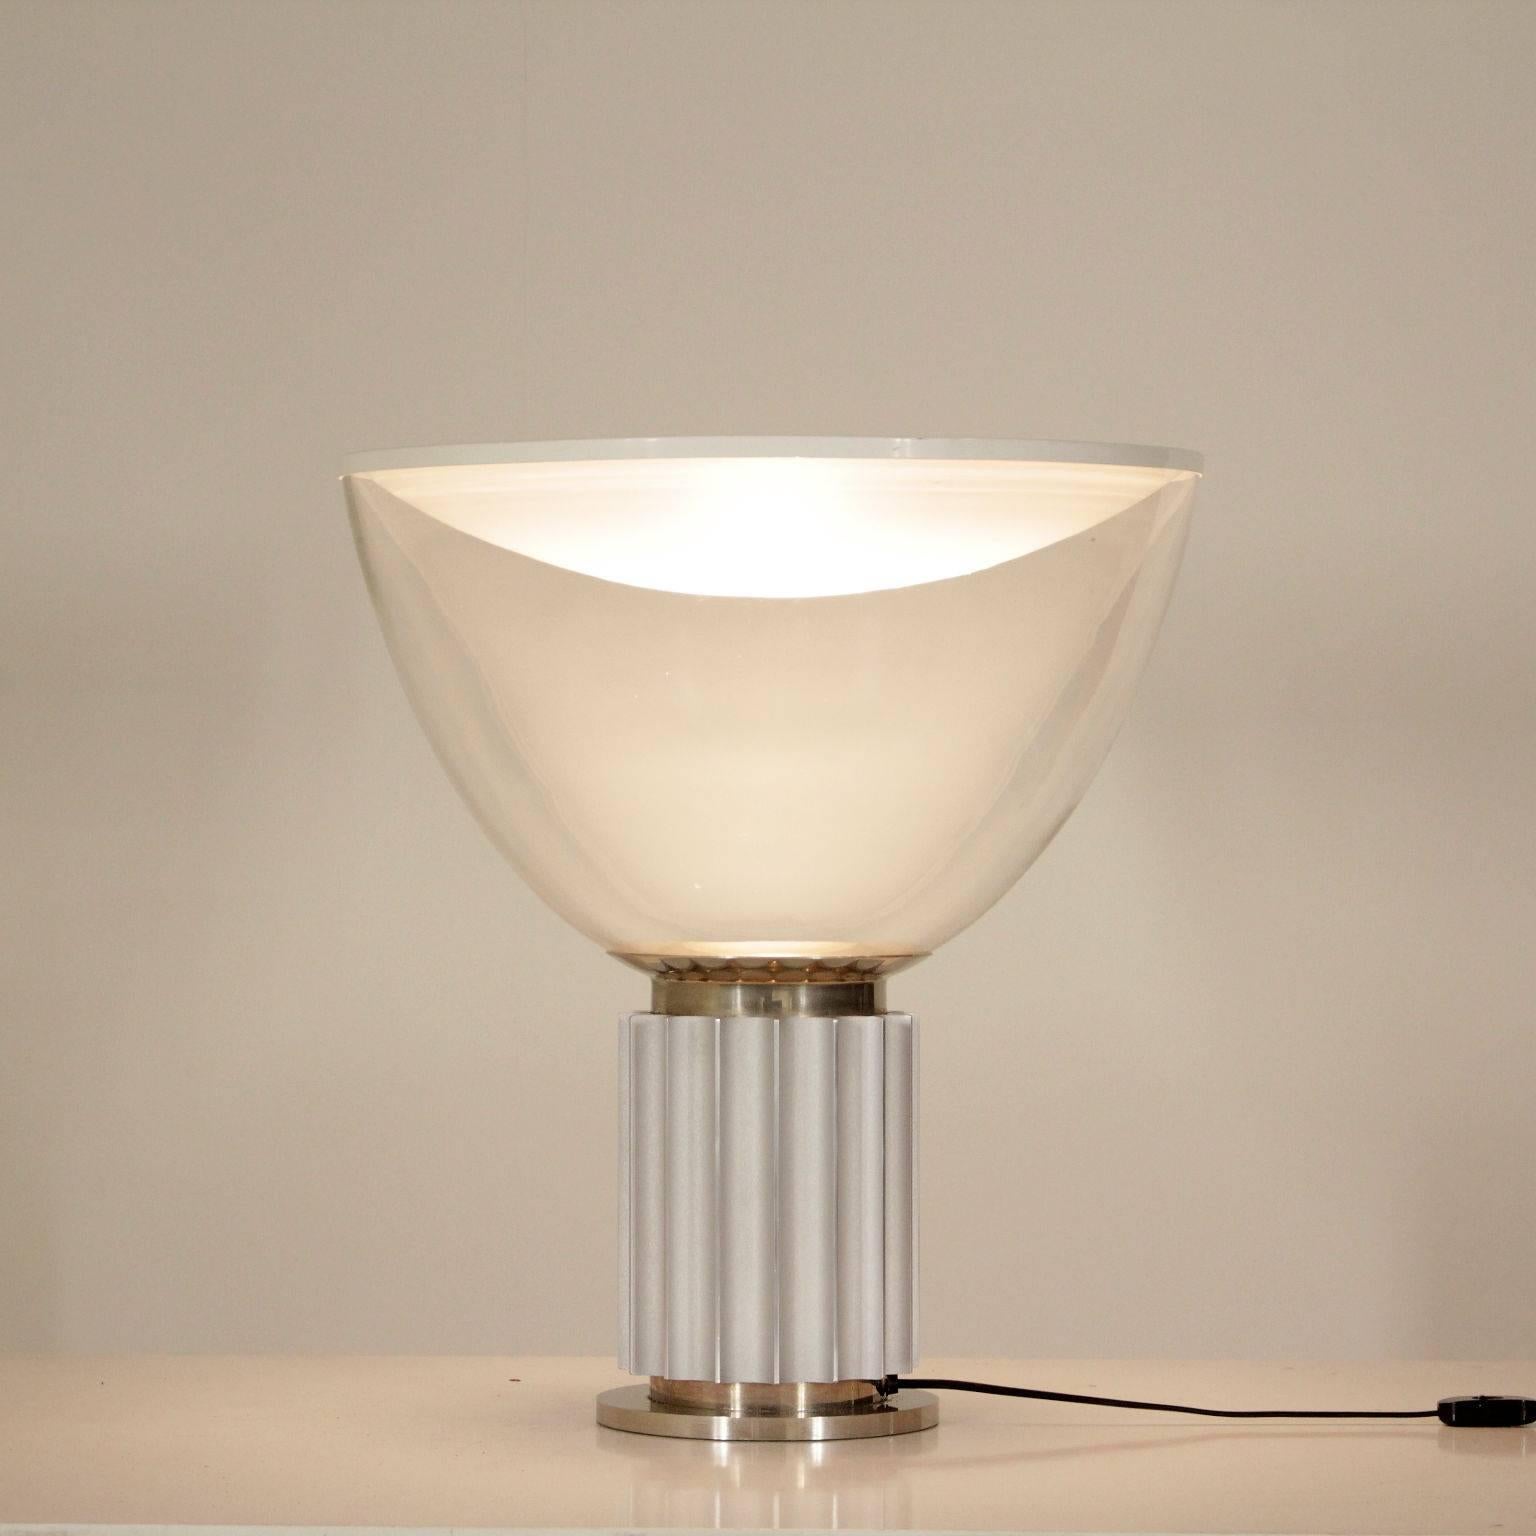 Mid-Century Modern 'Taccia' Table Lamp by Castiglioni Brothers for Flos Metal Aluminium Glass 1960s